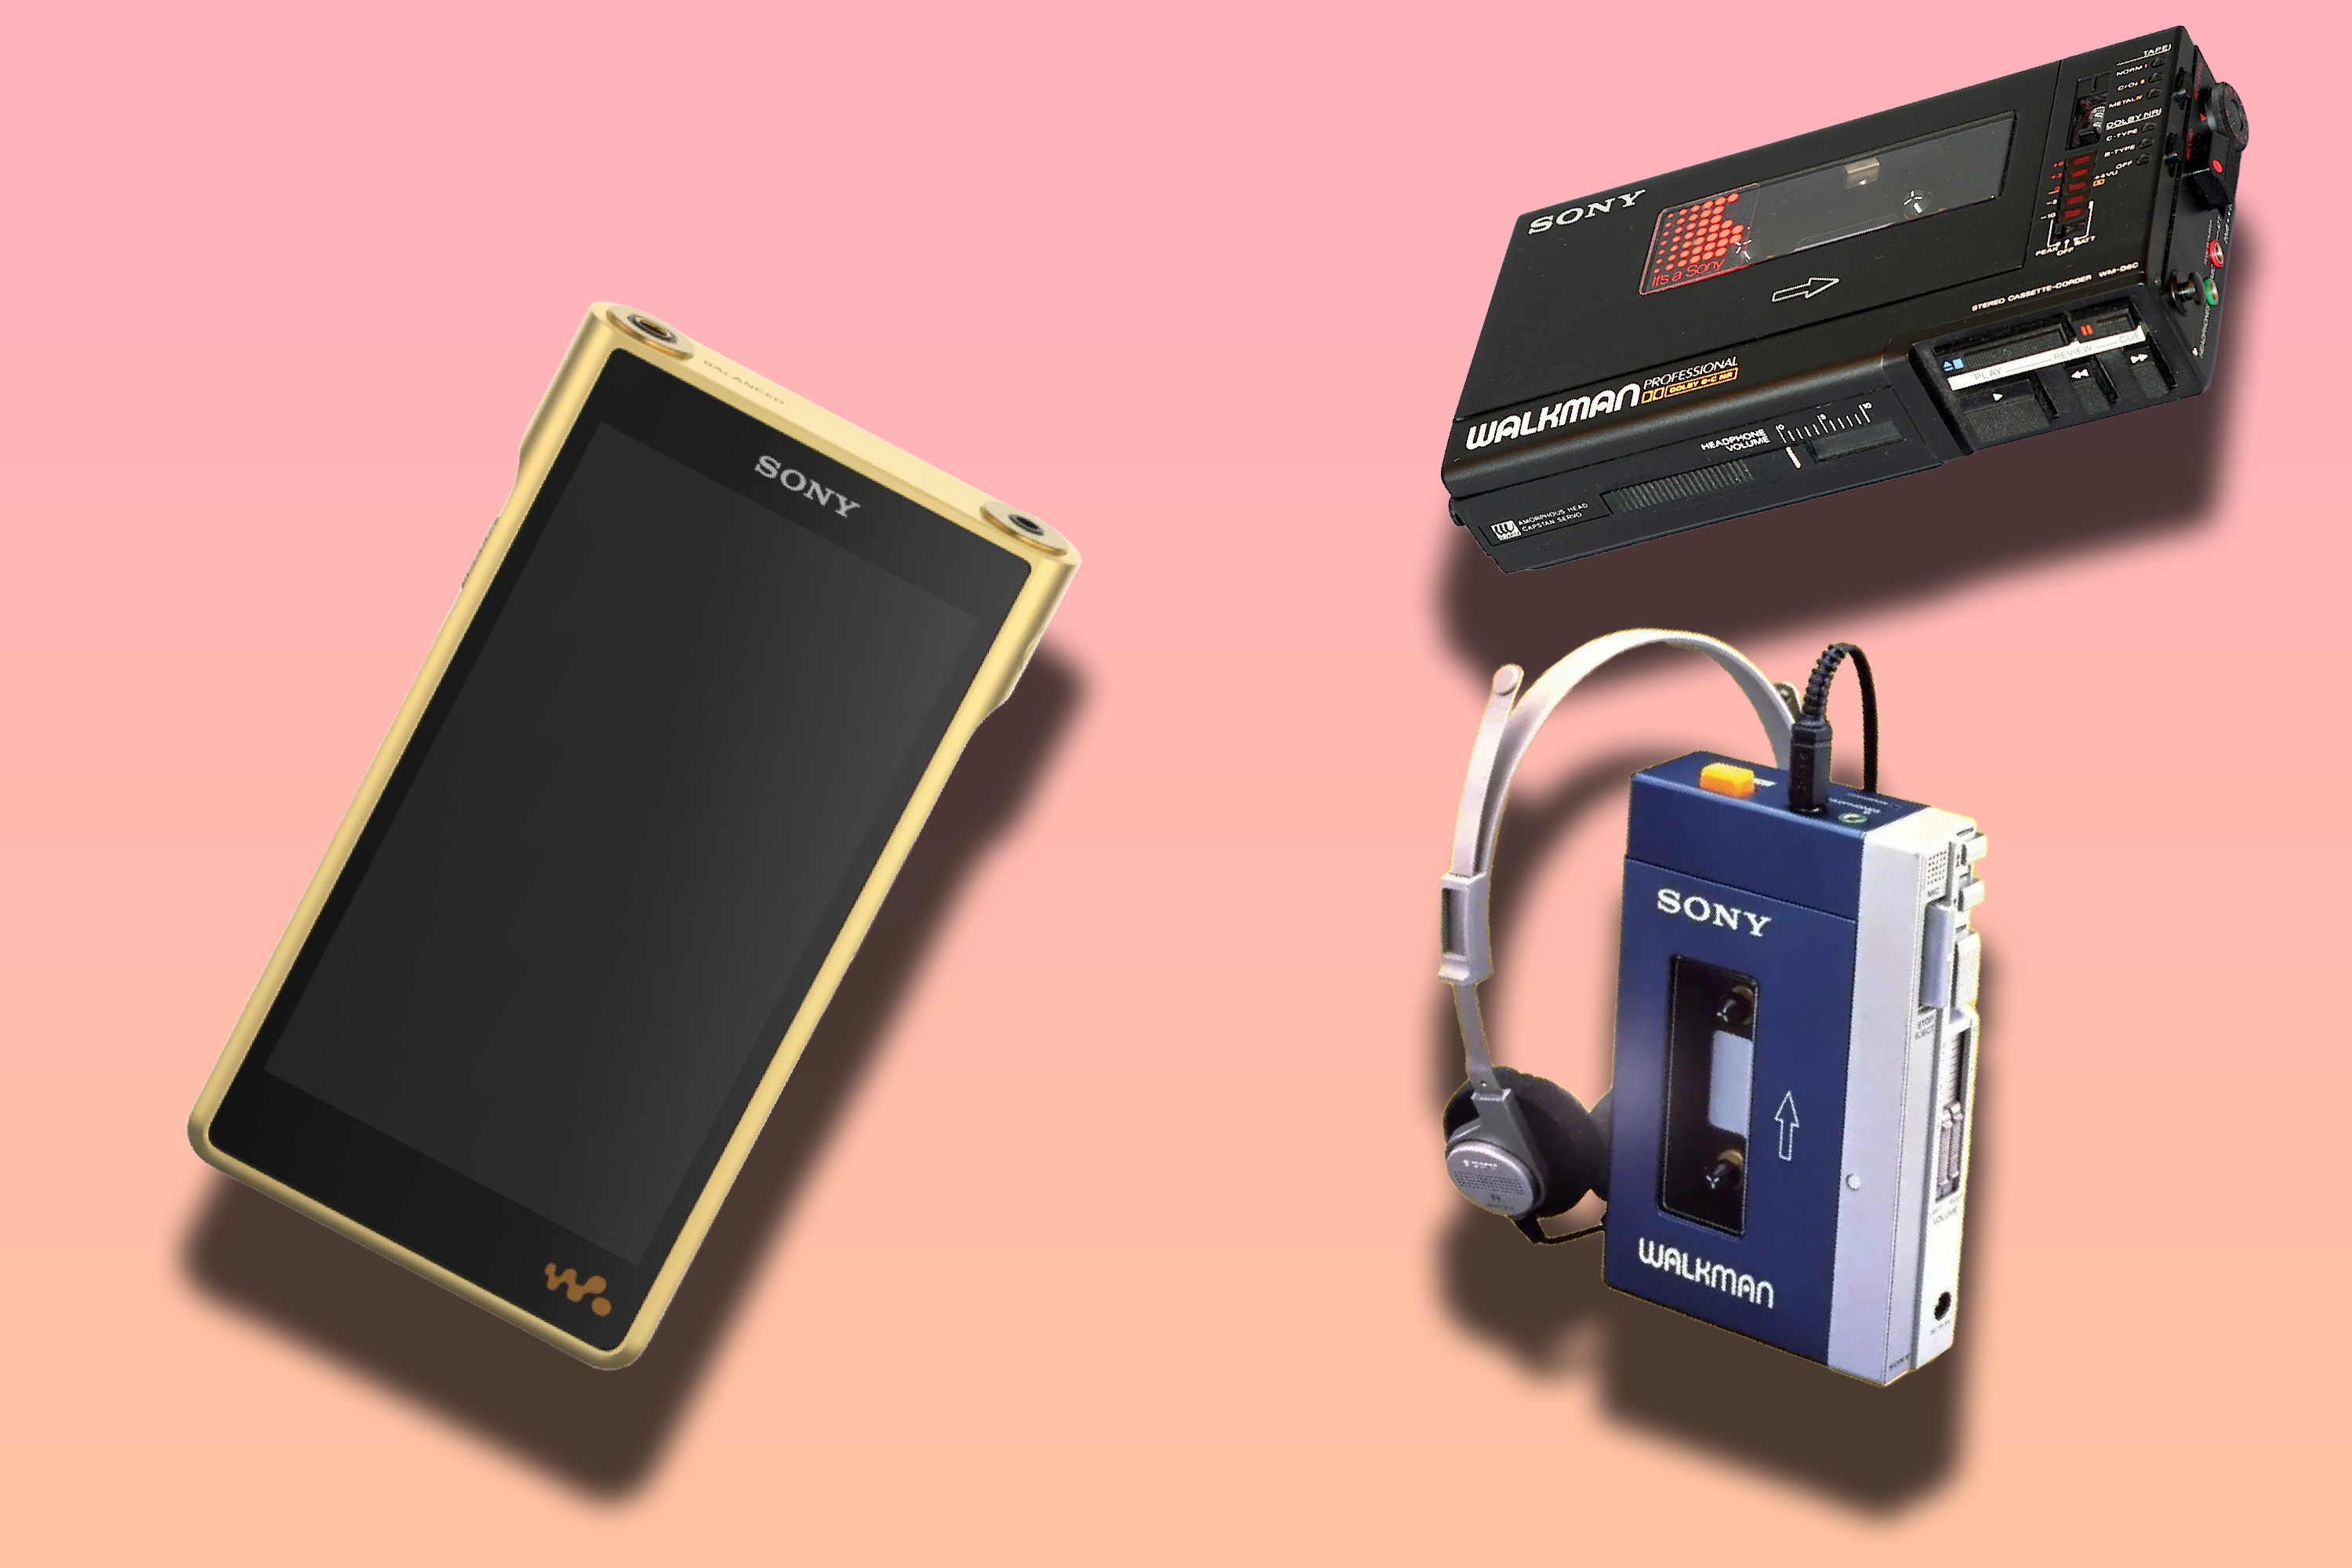 Sony launches new Walkman 40 years after original release but it